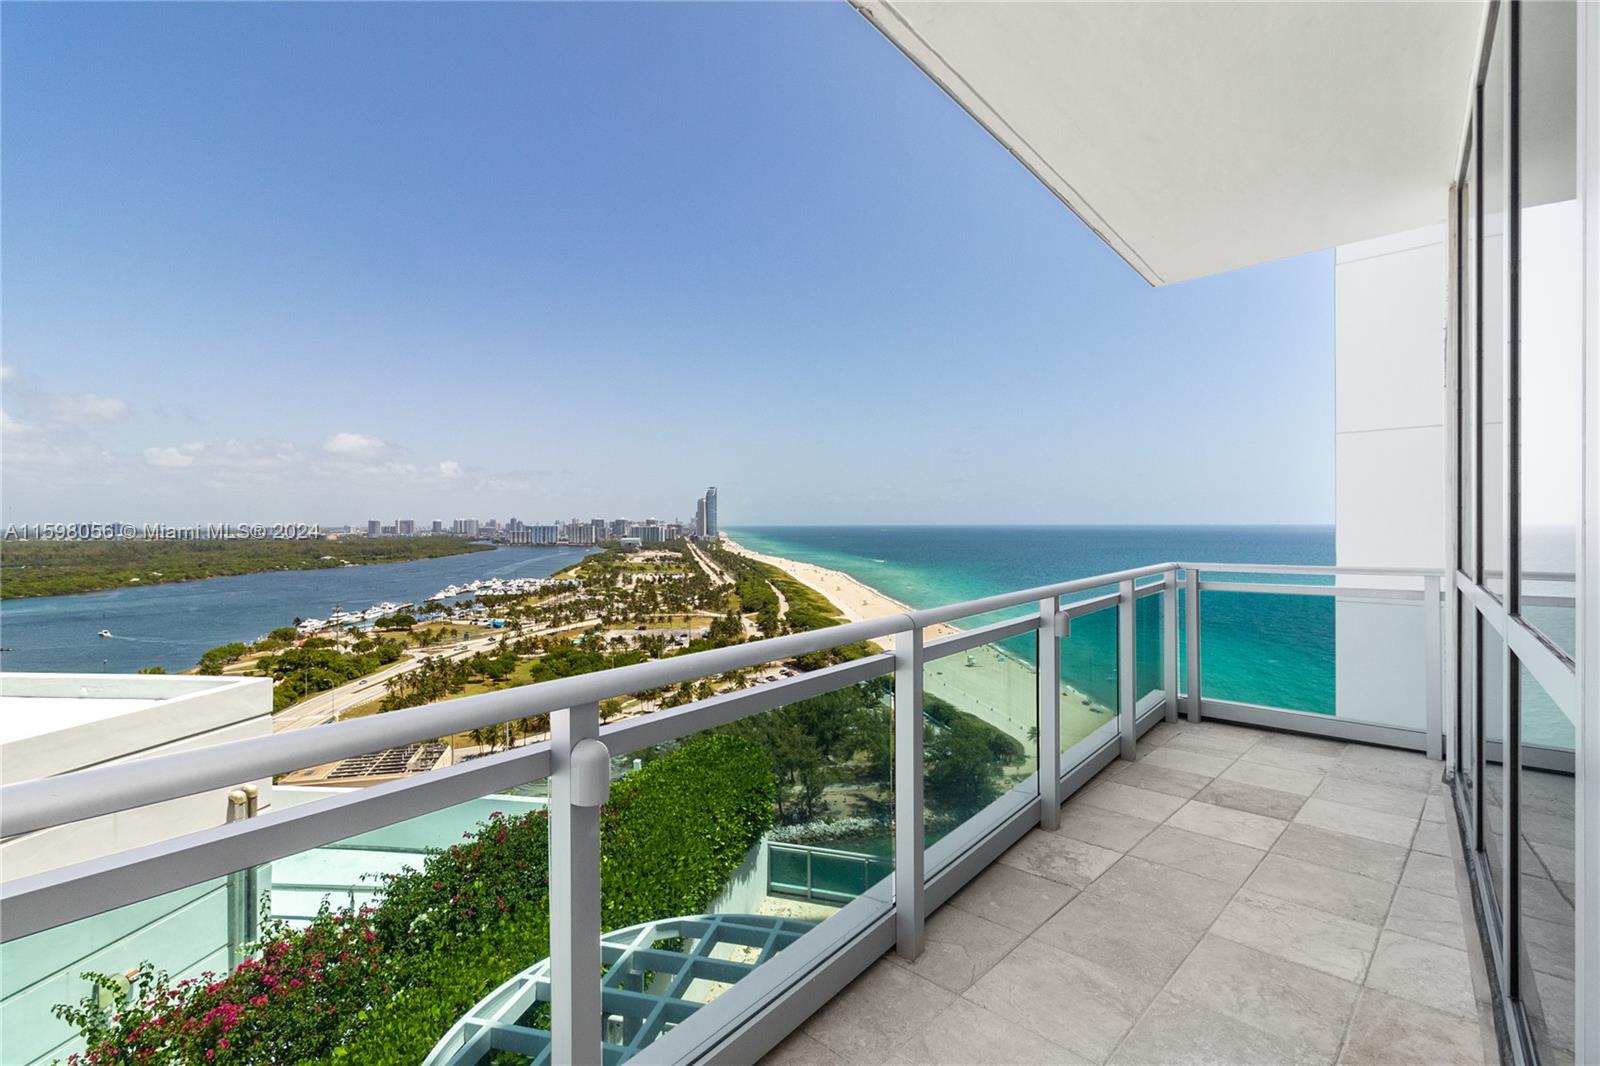 STUNNING UNIT AT PRESTIGIOUS RITZ ONE BAL HARBOUR FULLY REMODELED FEATURING 3 BEDROOMS AND 3.5 BATHS, DESIGNER FINISHES THROUGHOUT, OVERSIZED TERRACE, MODERN GOURMET KITCHEN WITH GAS STOVE, AND BEAUTIFUL OCEAN VIEWS FROM EVERY ROOM. INDULGE IN THE MOST LUXURIOUS 5 STAR RITZ CARLTON RESORT AMENITIES. 6 MONTH MINIMUM RENTAL AS PER BUILDING. AVAILABLE FOR OCCUPANCY UPON CONDO APPROVAL. CALL OR TEXT LISTING AGENT FOR SHOWING.